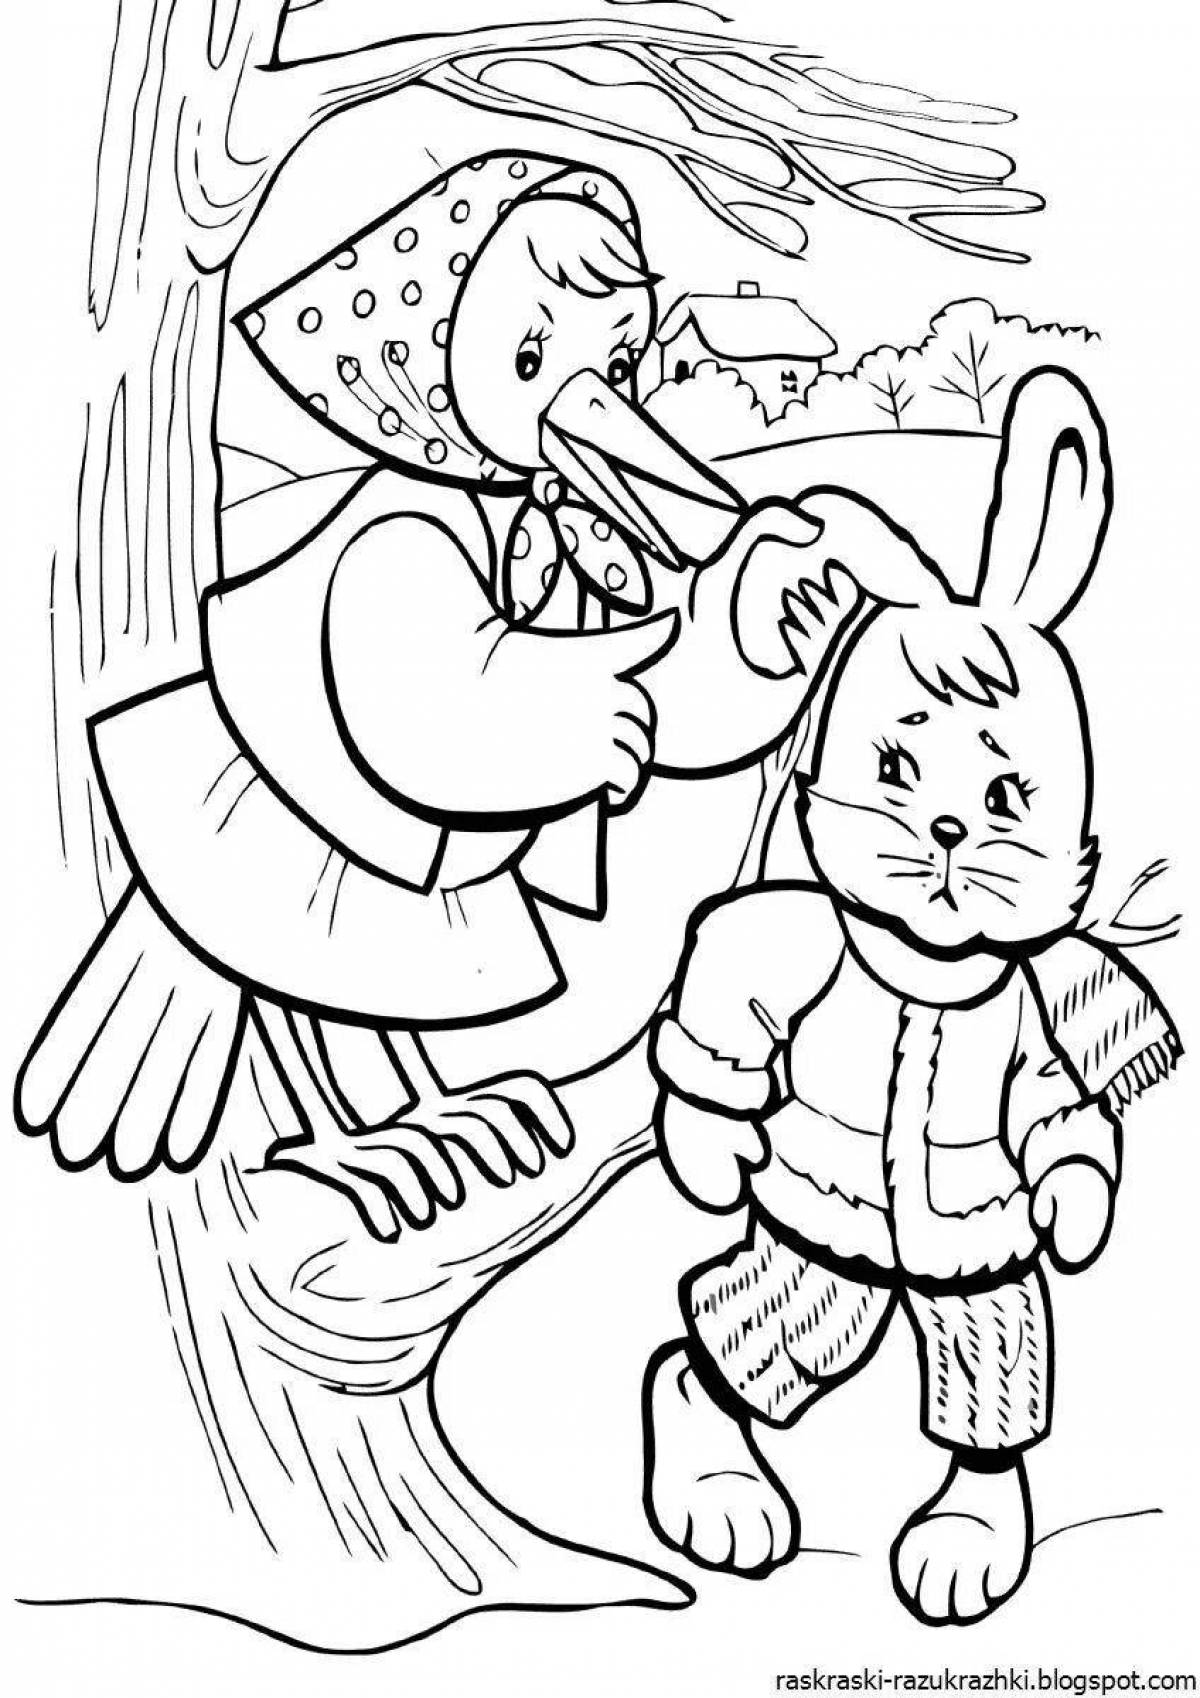 Fairytale coloring book from Russian folk tales